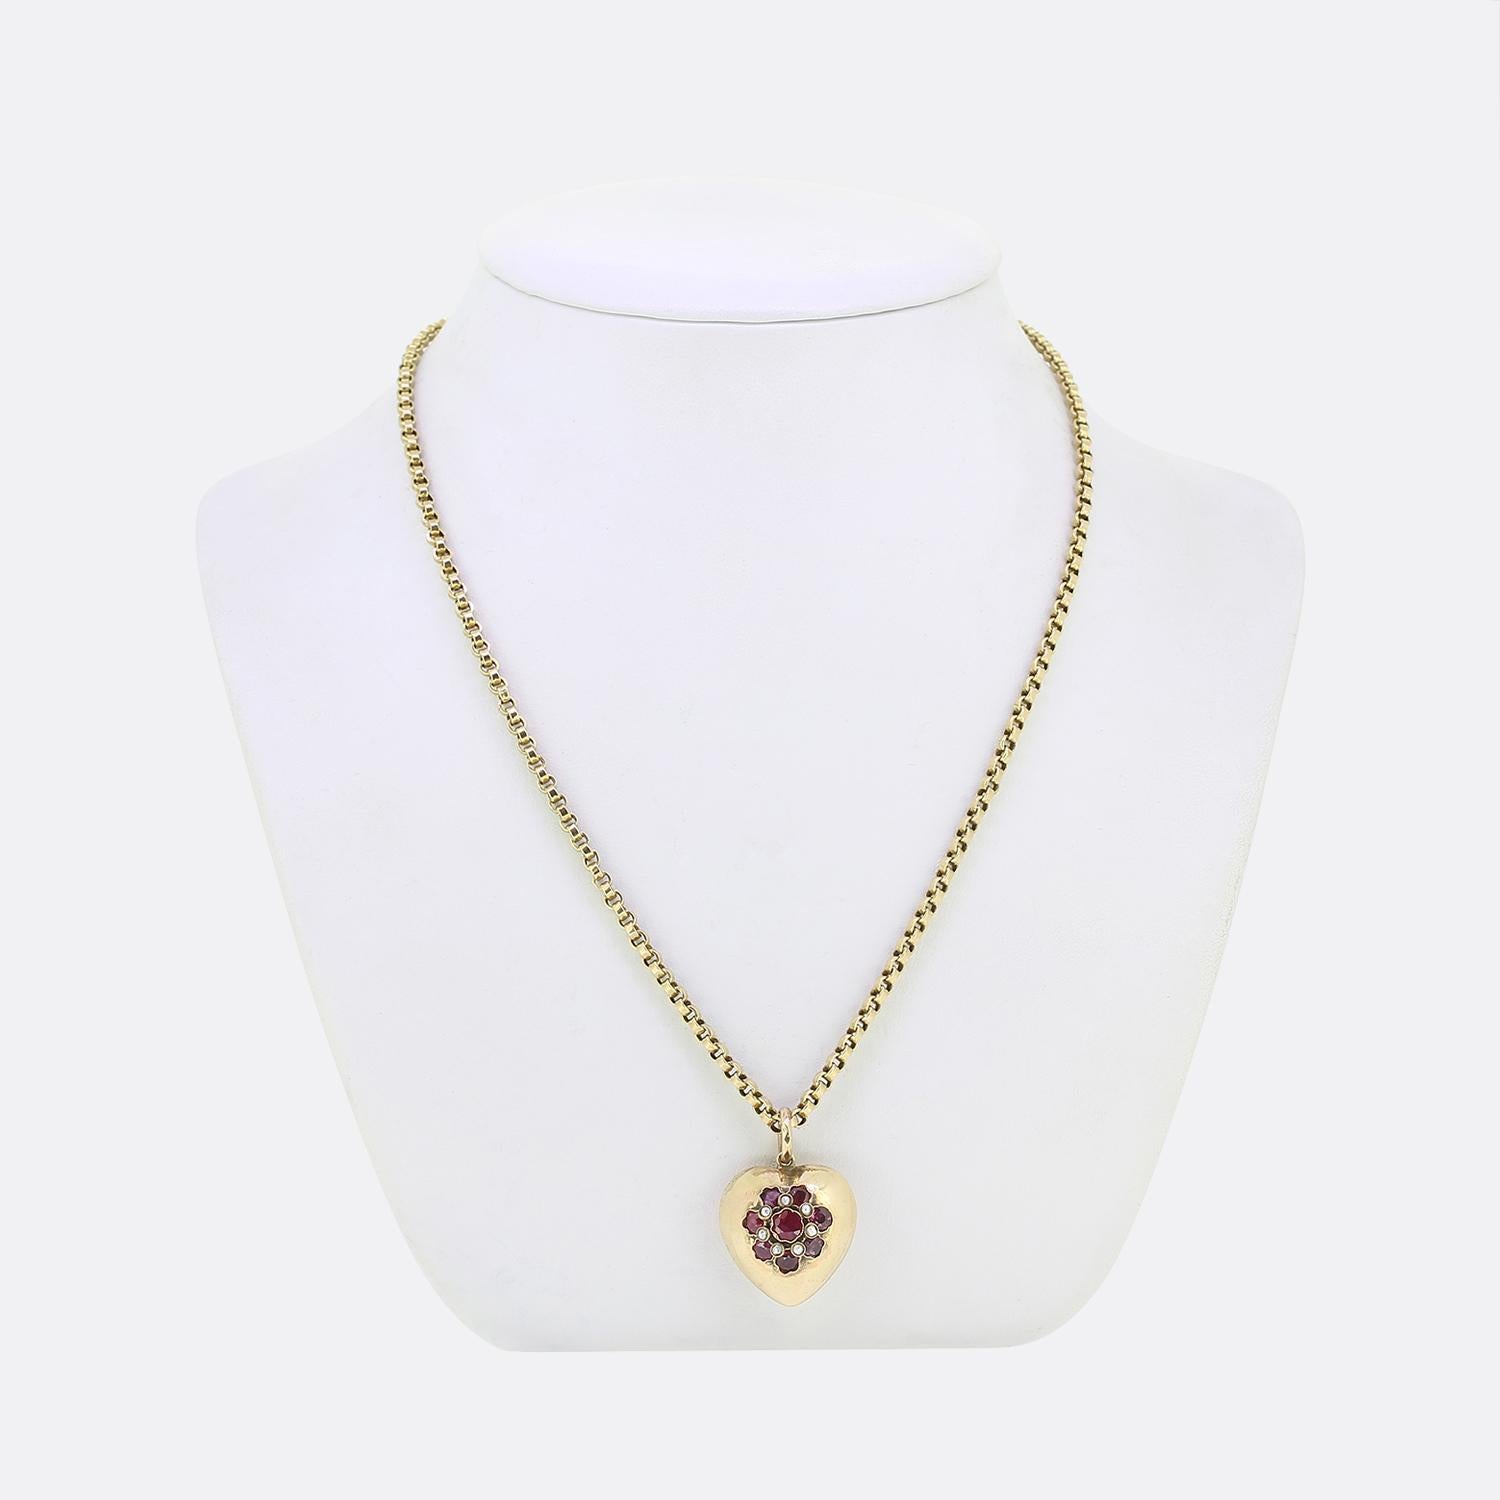 Here we have a charming ruby and pearl necklace. This vintage piece has been crafted from 9ct yellow gold with the pendant forming the shape of a love heart. This hollow motif plays host to a daisy-like array of round faceted rubies; each of which